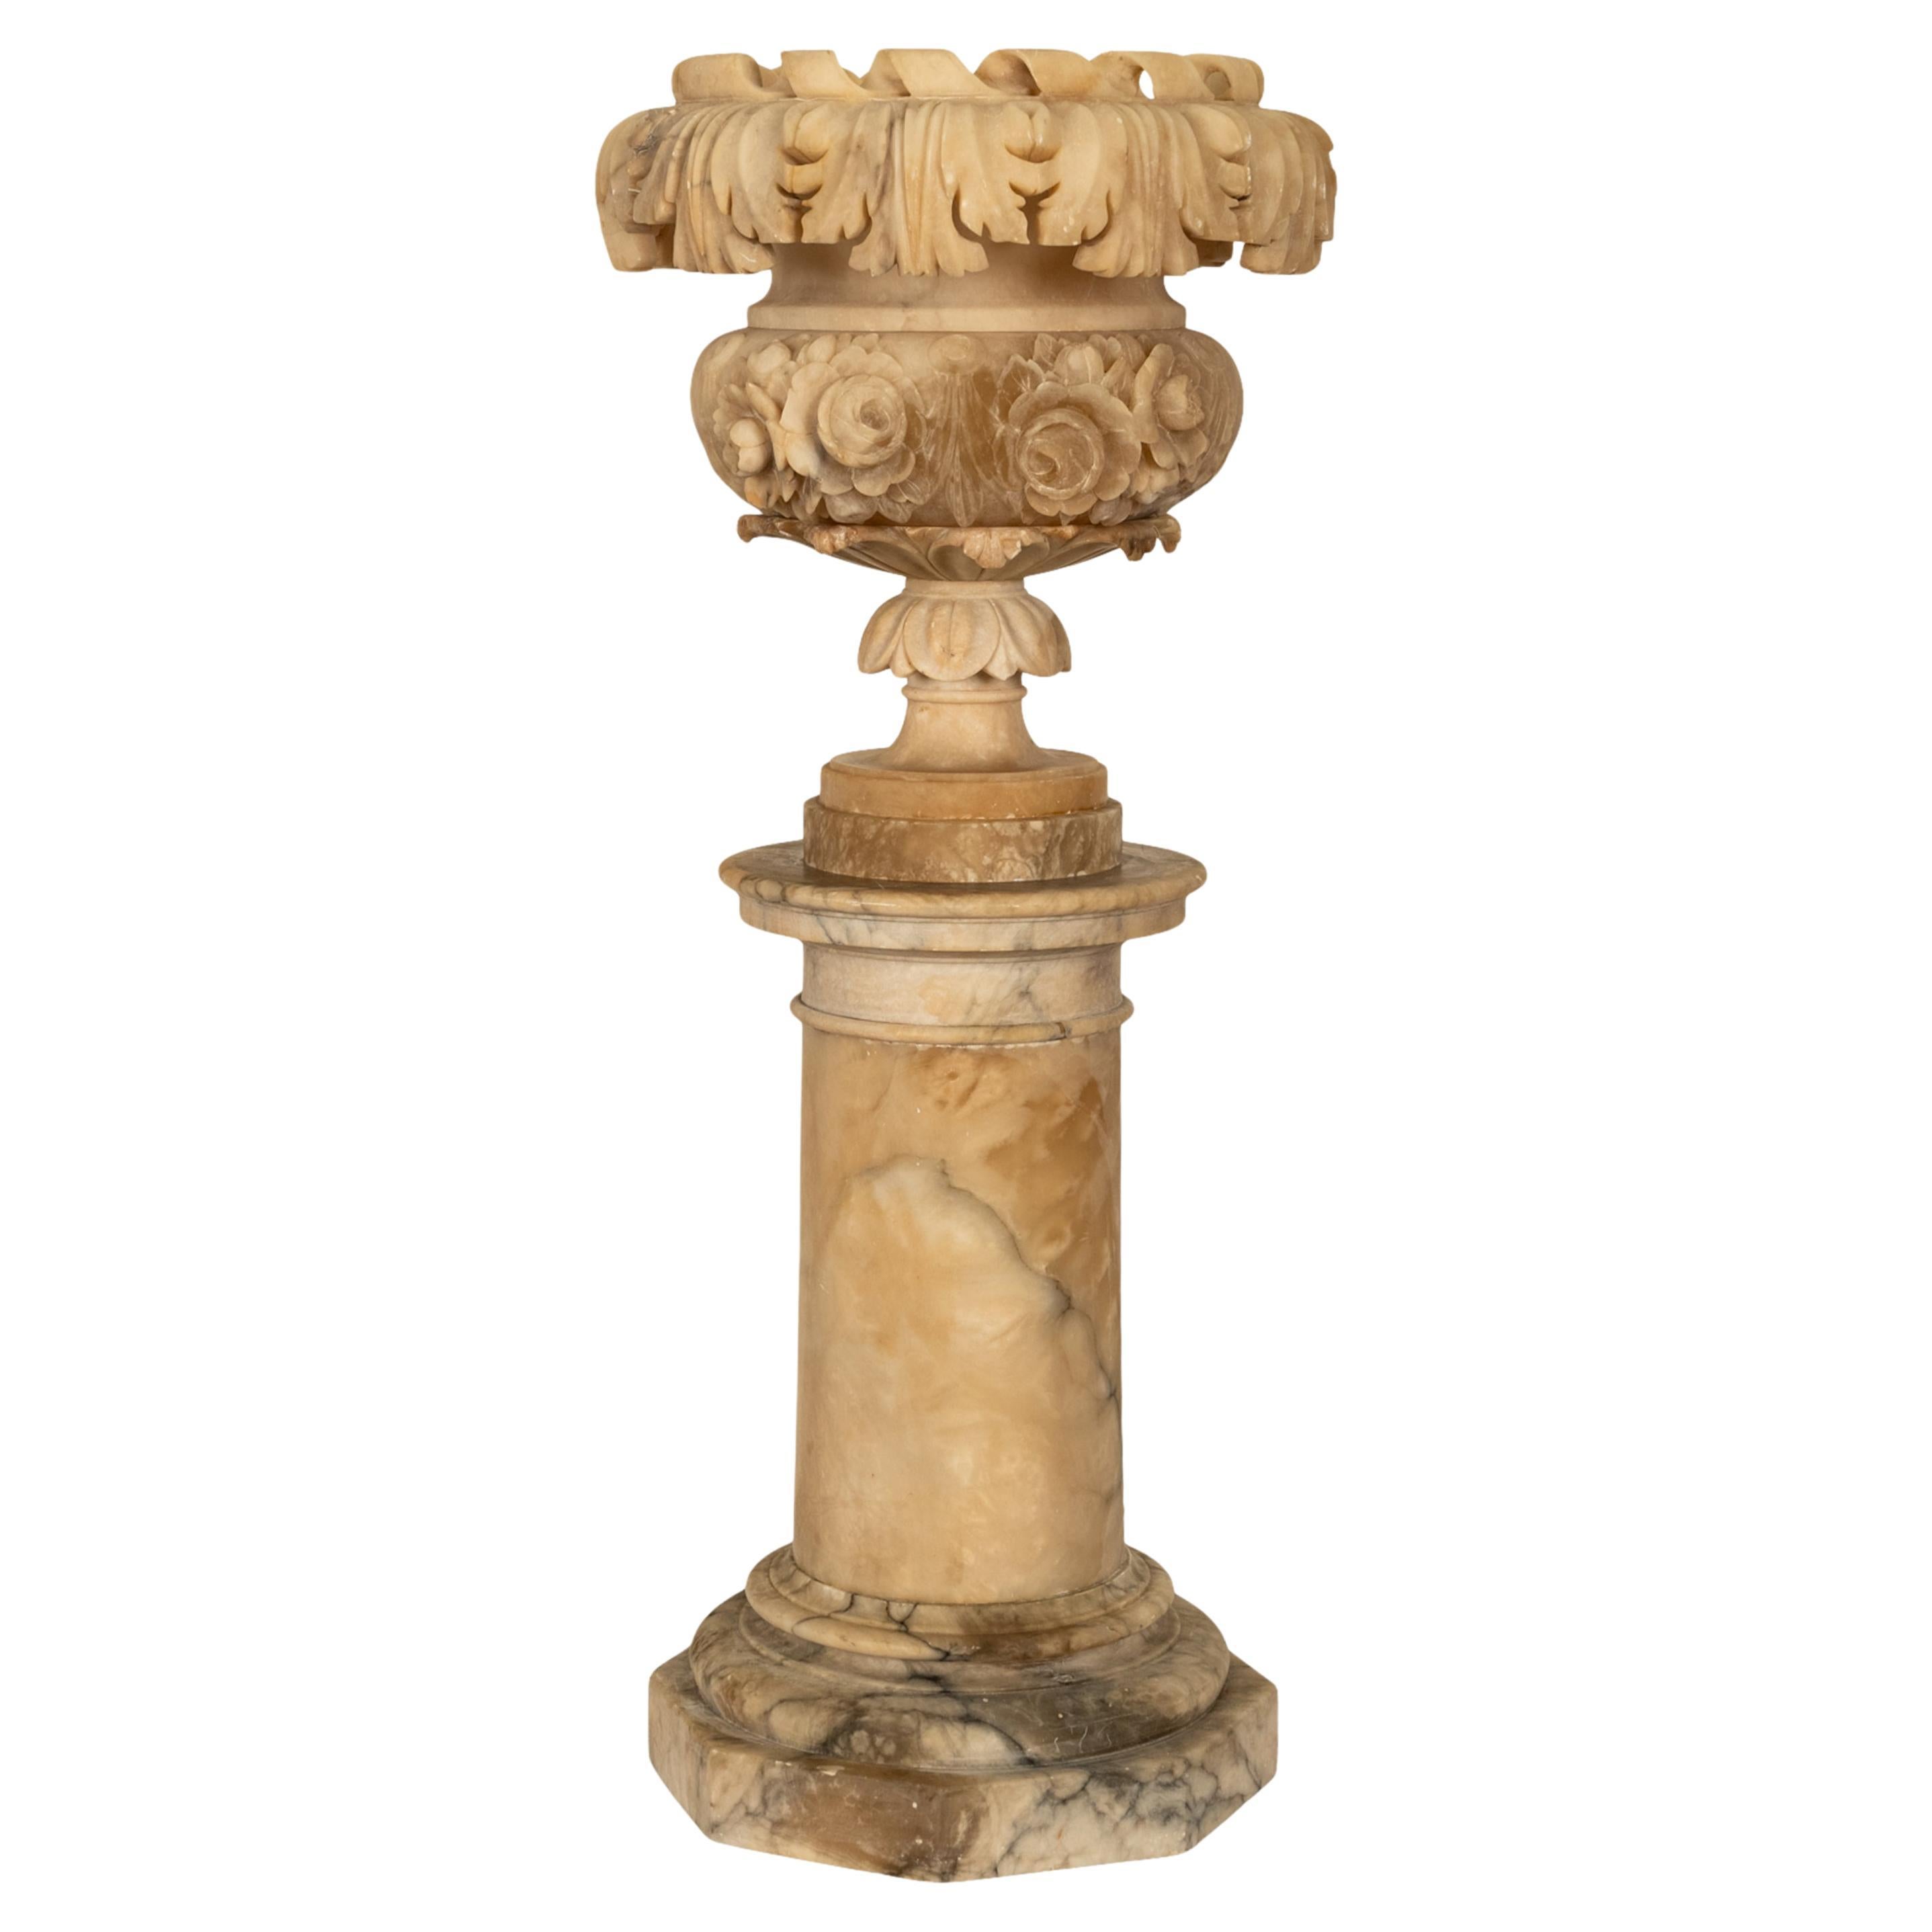 Antique 19th Century Italian Carved Alabaster Neoclassical Urn on Pedestal 1850